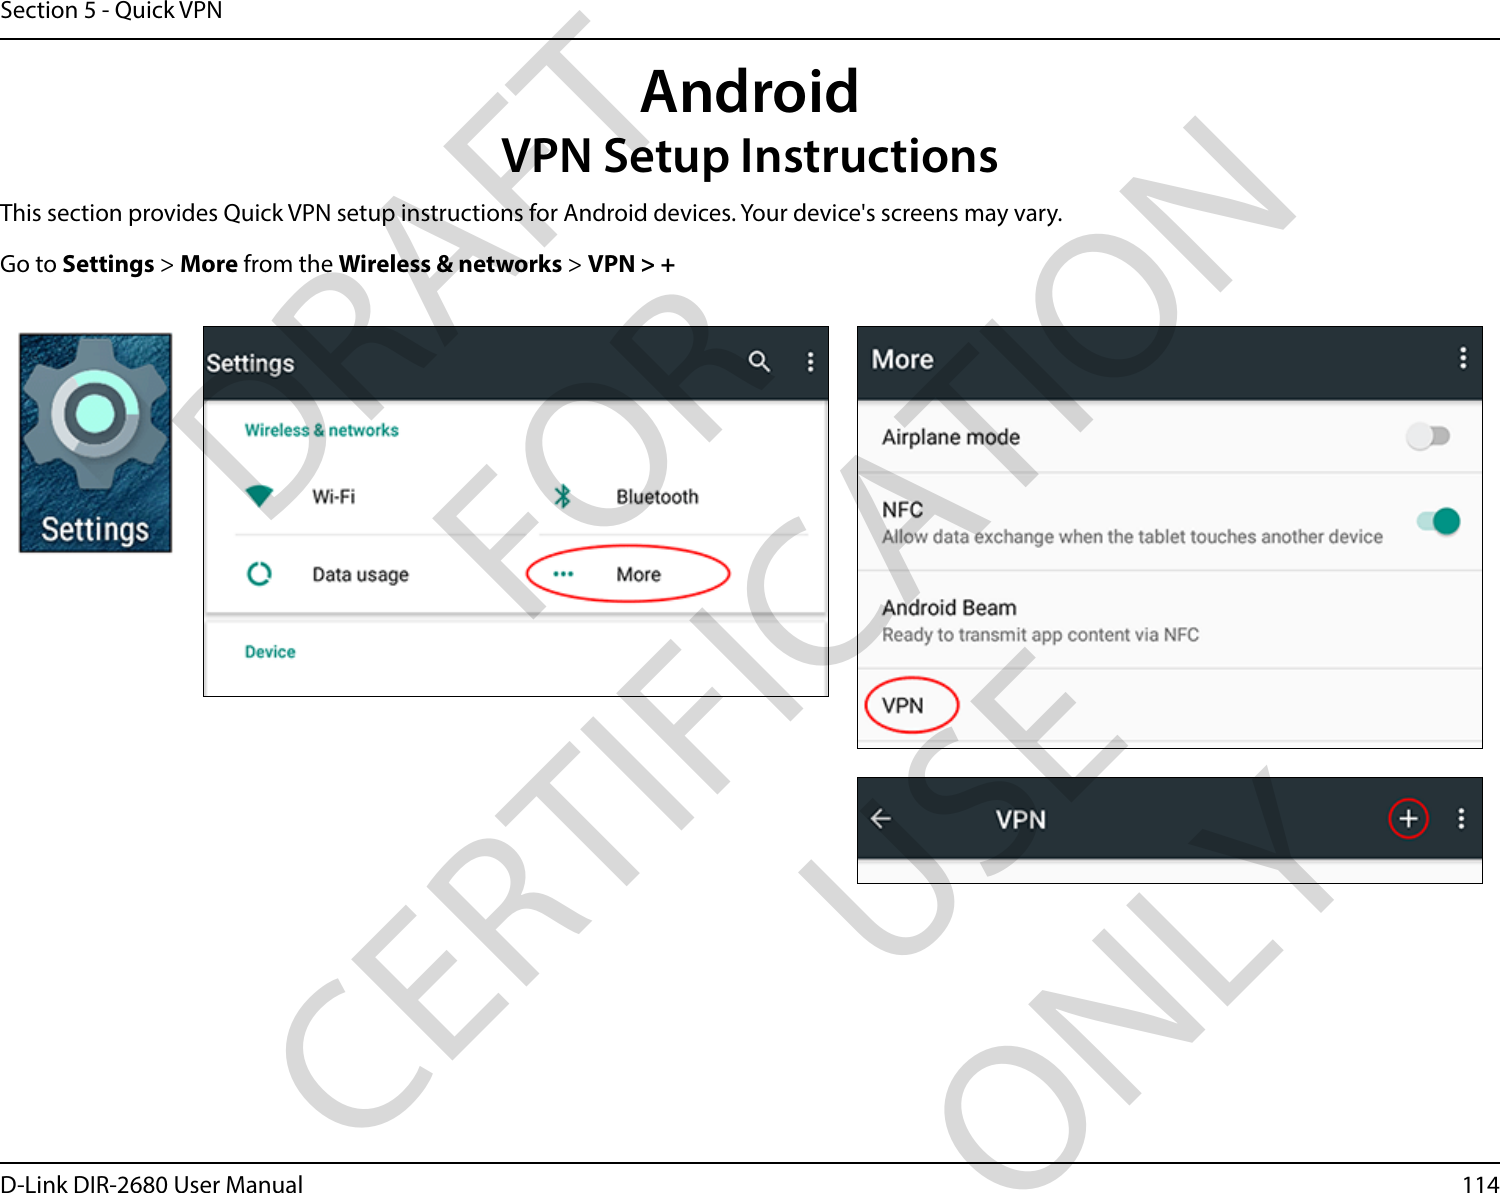 114D-Link DIR-2680 User ManualSection 5 - Quick VPNThis section provides Quick VPN setup instructions for Android devices. Your device&apos;s screens may vary.Go to Settings &gt; More from the Wireless &amp; networks &gt; VPN &gt; +AndroidVPN Setup InstructionsDRAFT FOR CERTIFICATION USE ONLY